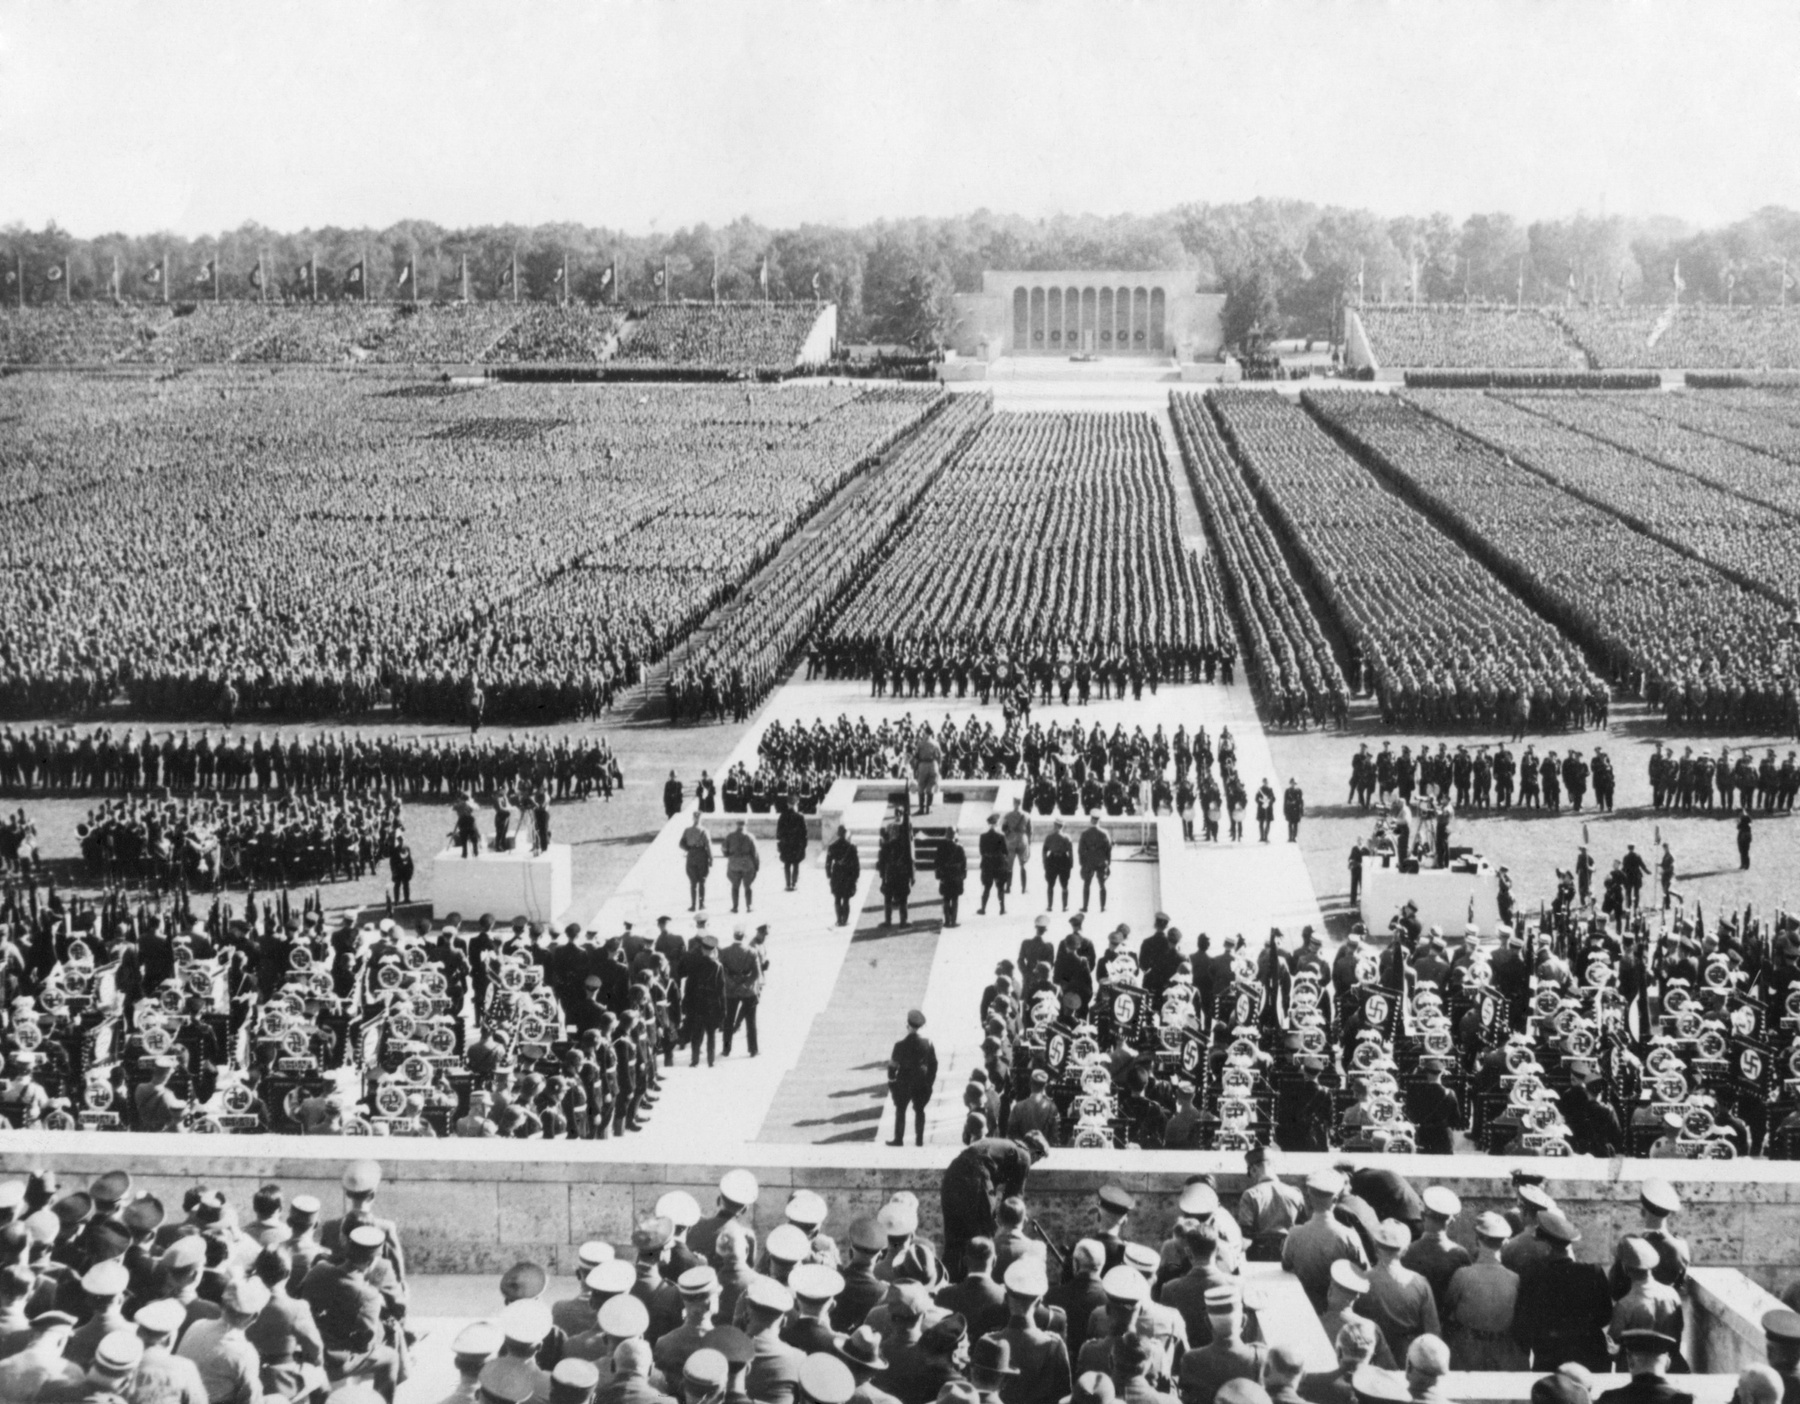 Ranks of the Nazi German army fill Zeppelin Field in Nuremberg. They are addressed by Hitler from a podium (center) during the Nazi Party Congress, Sept. 8, 1938. - (BSLOC_2014_14_10)